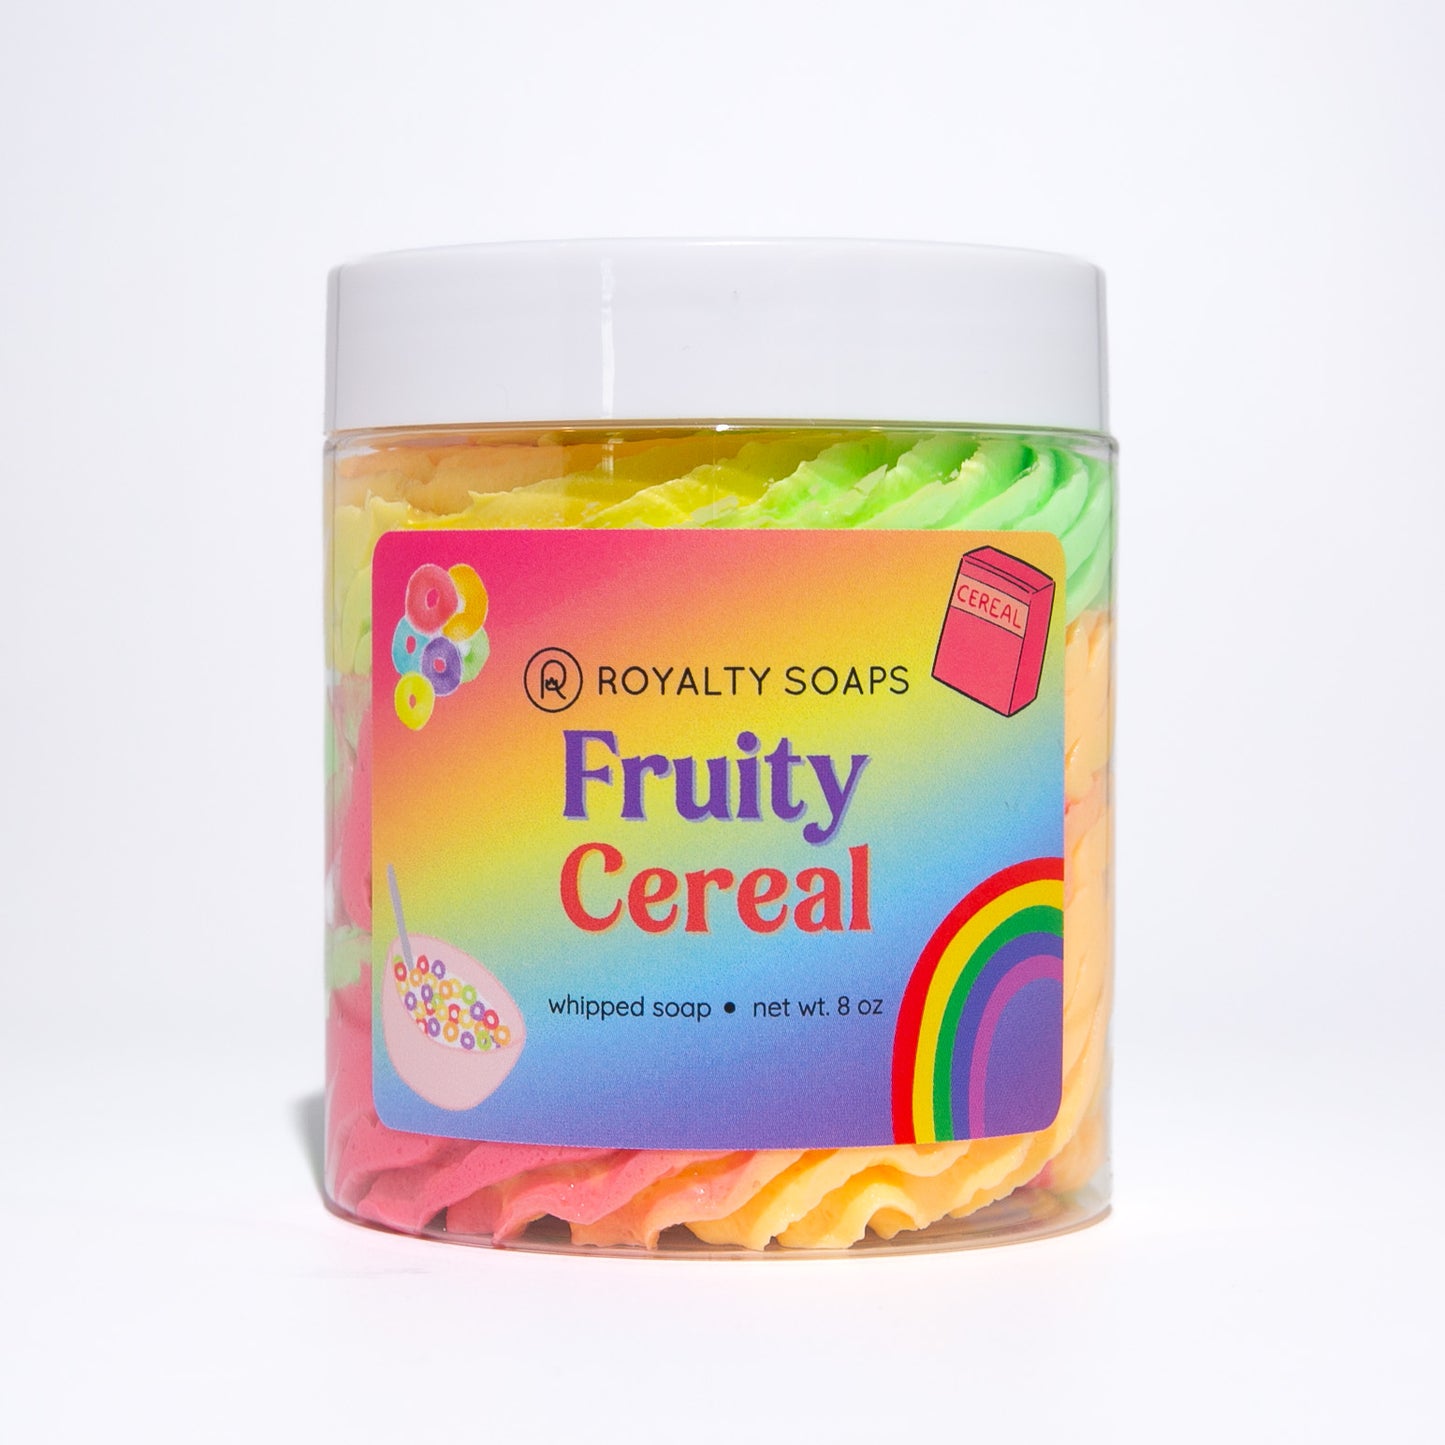 Fruity Cereal 8oz Whipped Soap